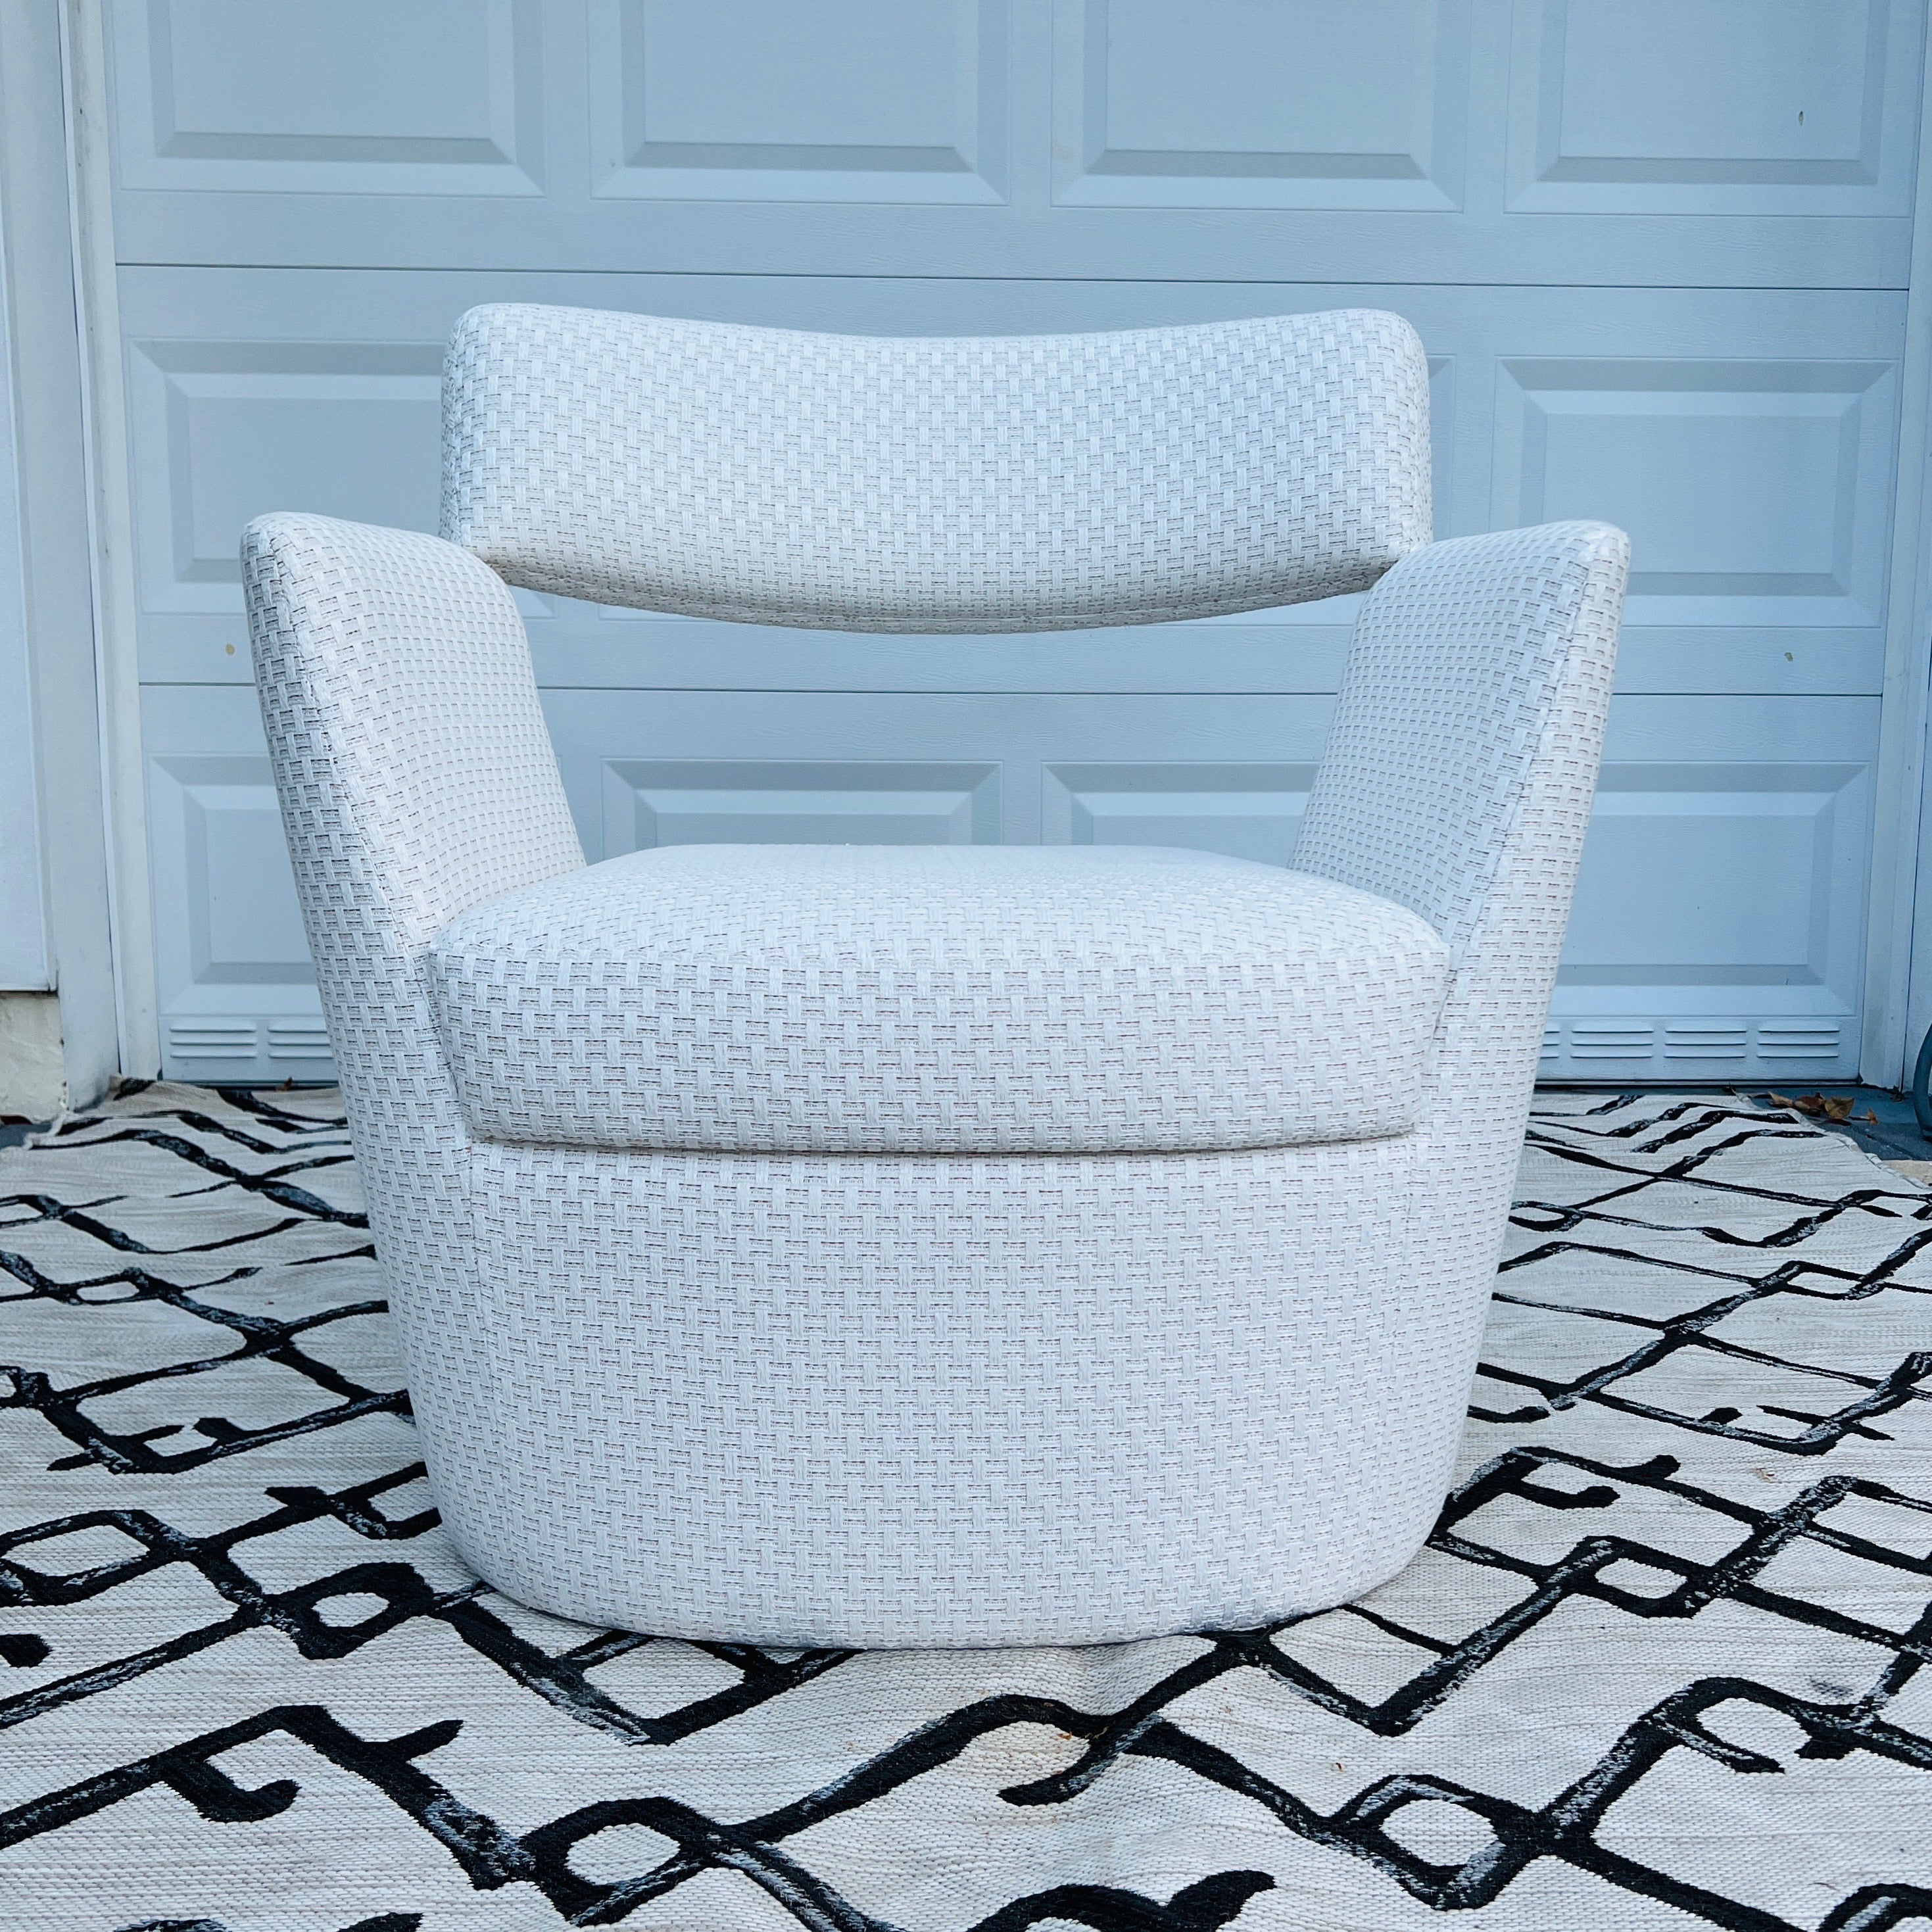 French Modernist Armchair in Woven Outdoor Fabric by Pierre Frey For Sale